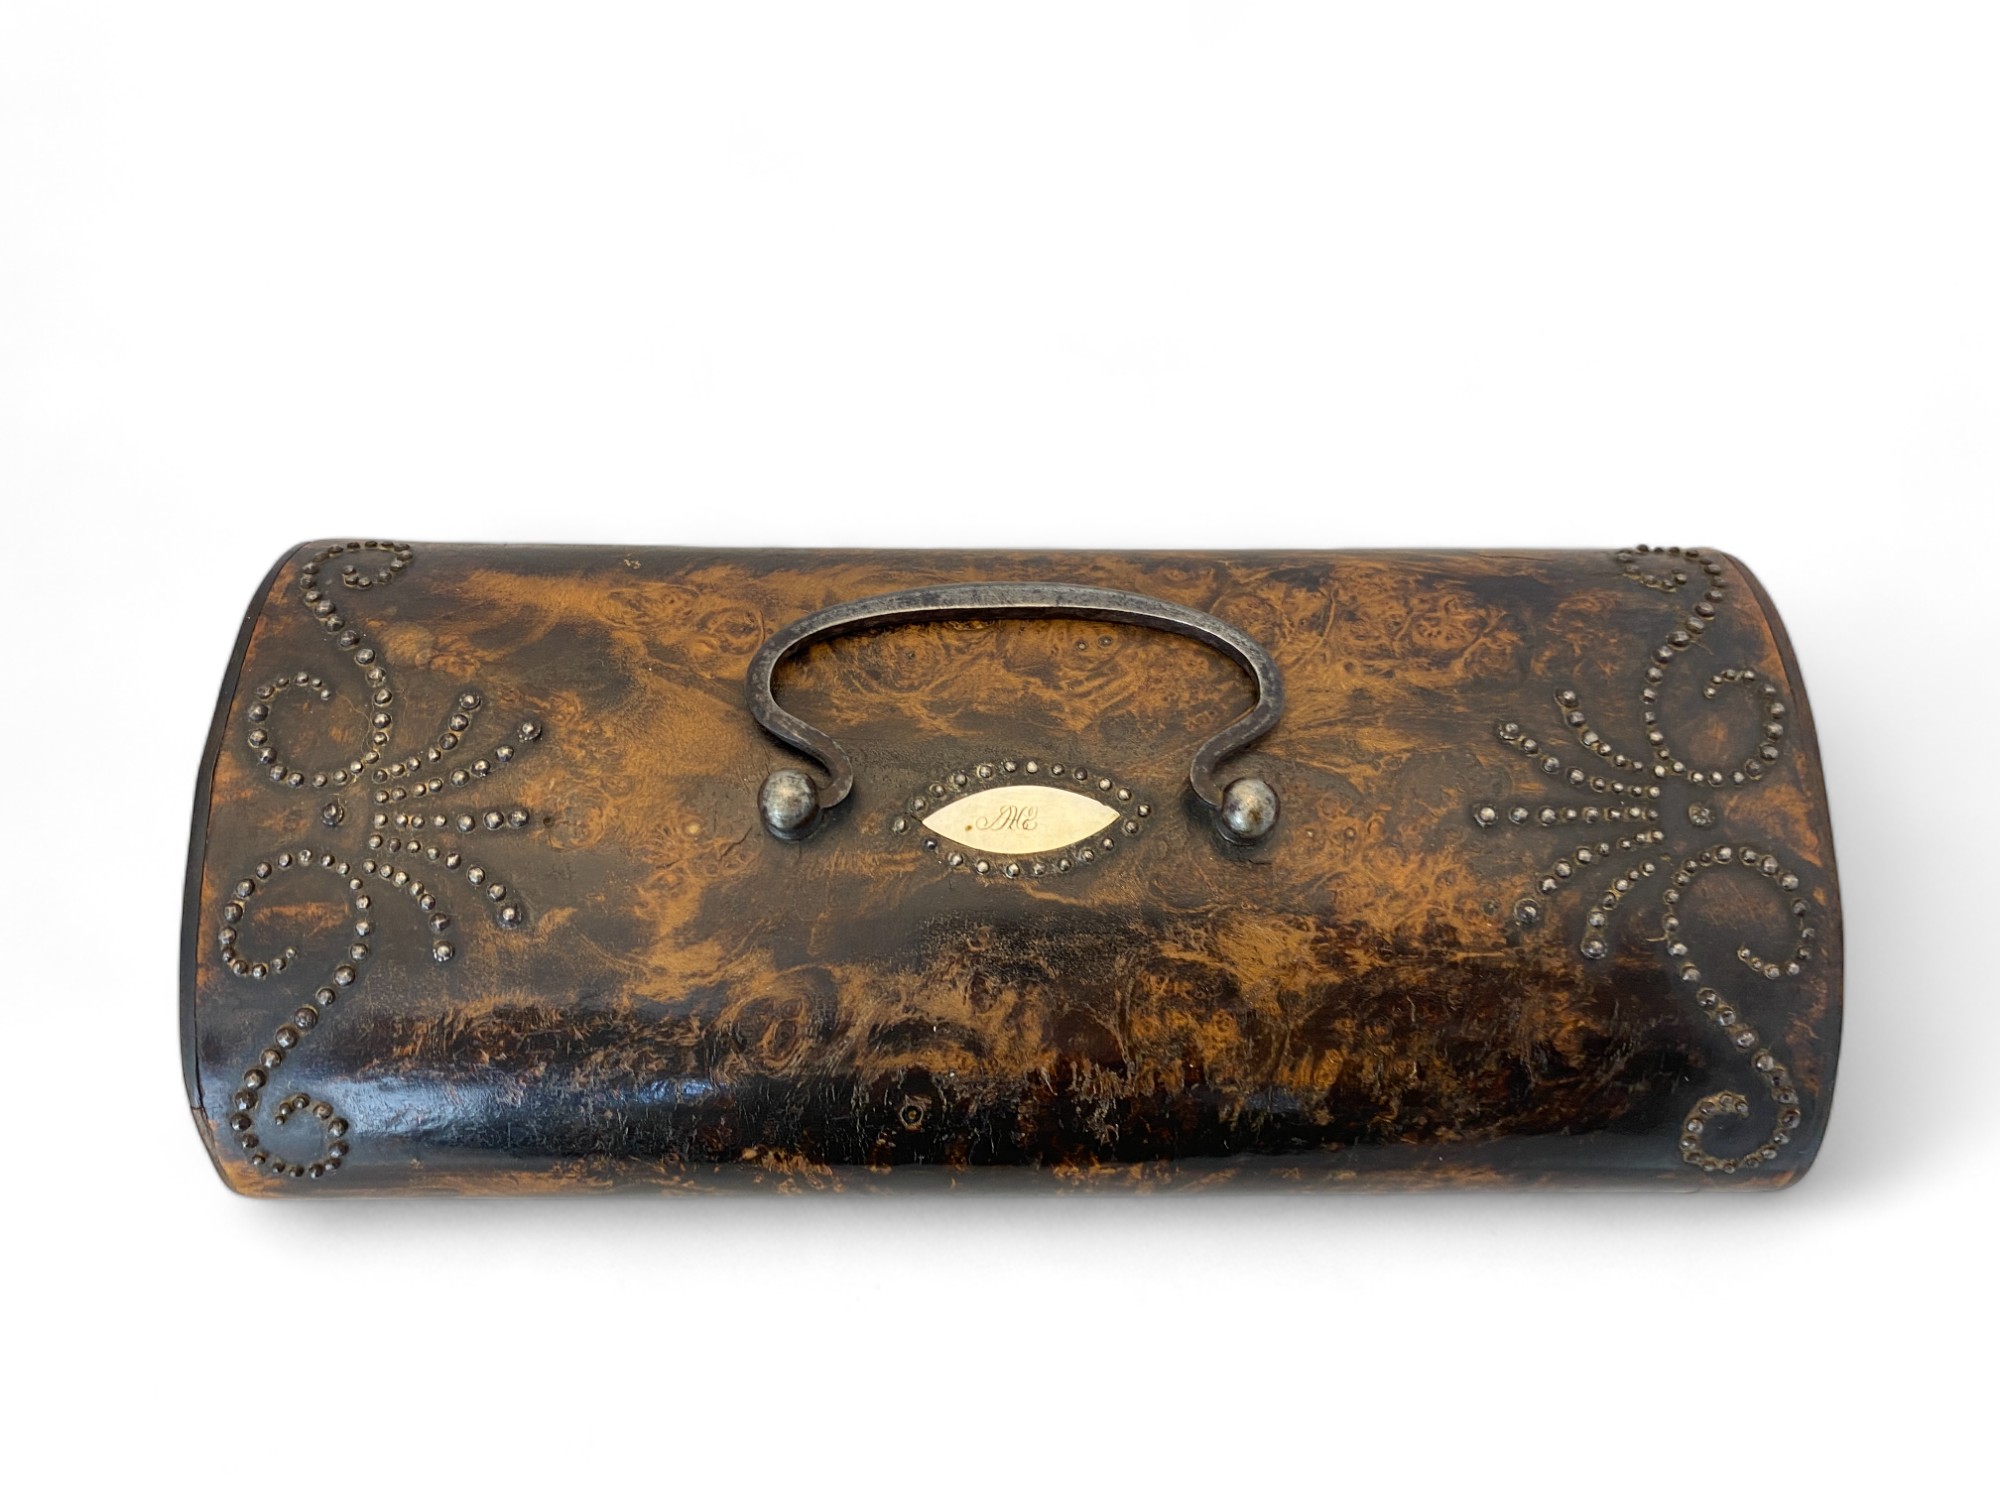 A mid 19th century French small burr walnut and cut steel decorated casket by Irlande, Palais Royal - Image 5 of 8